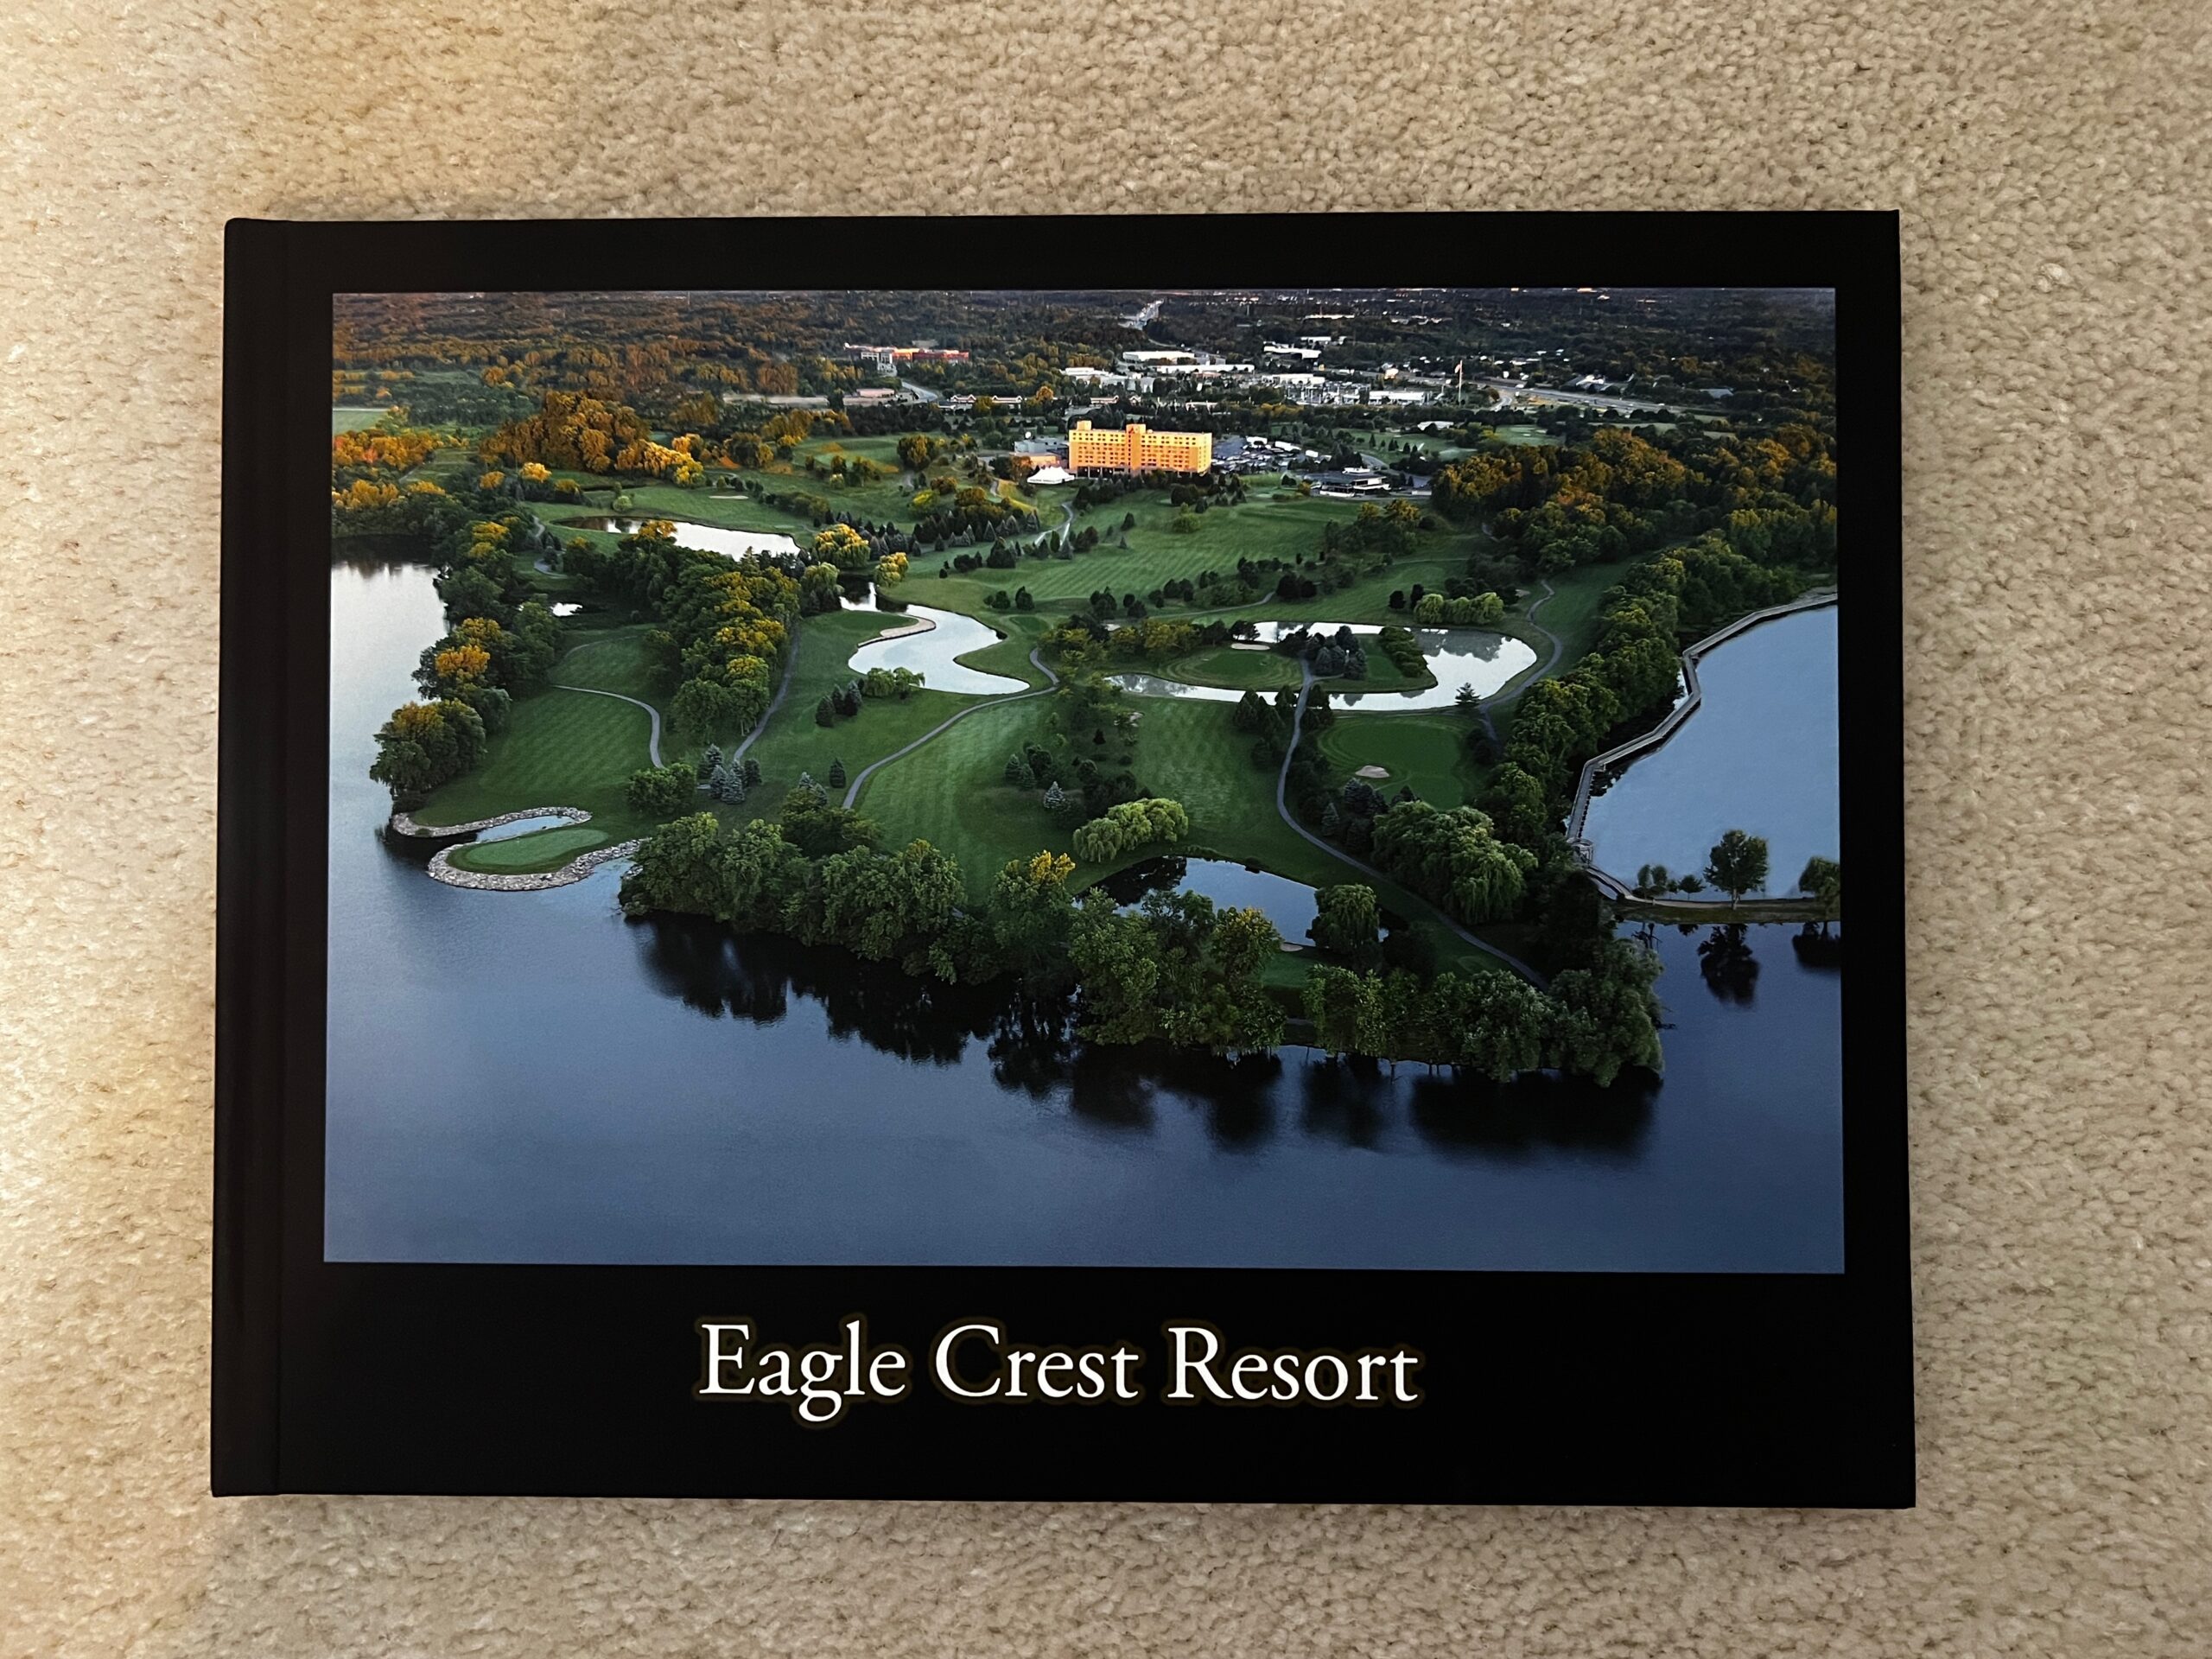 Eagle Crest Resort Coffee Table Book